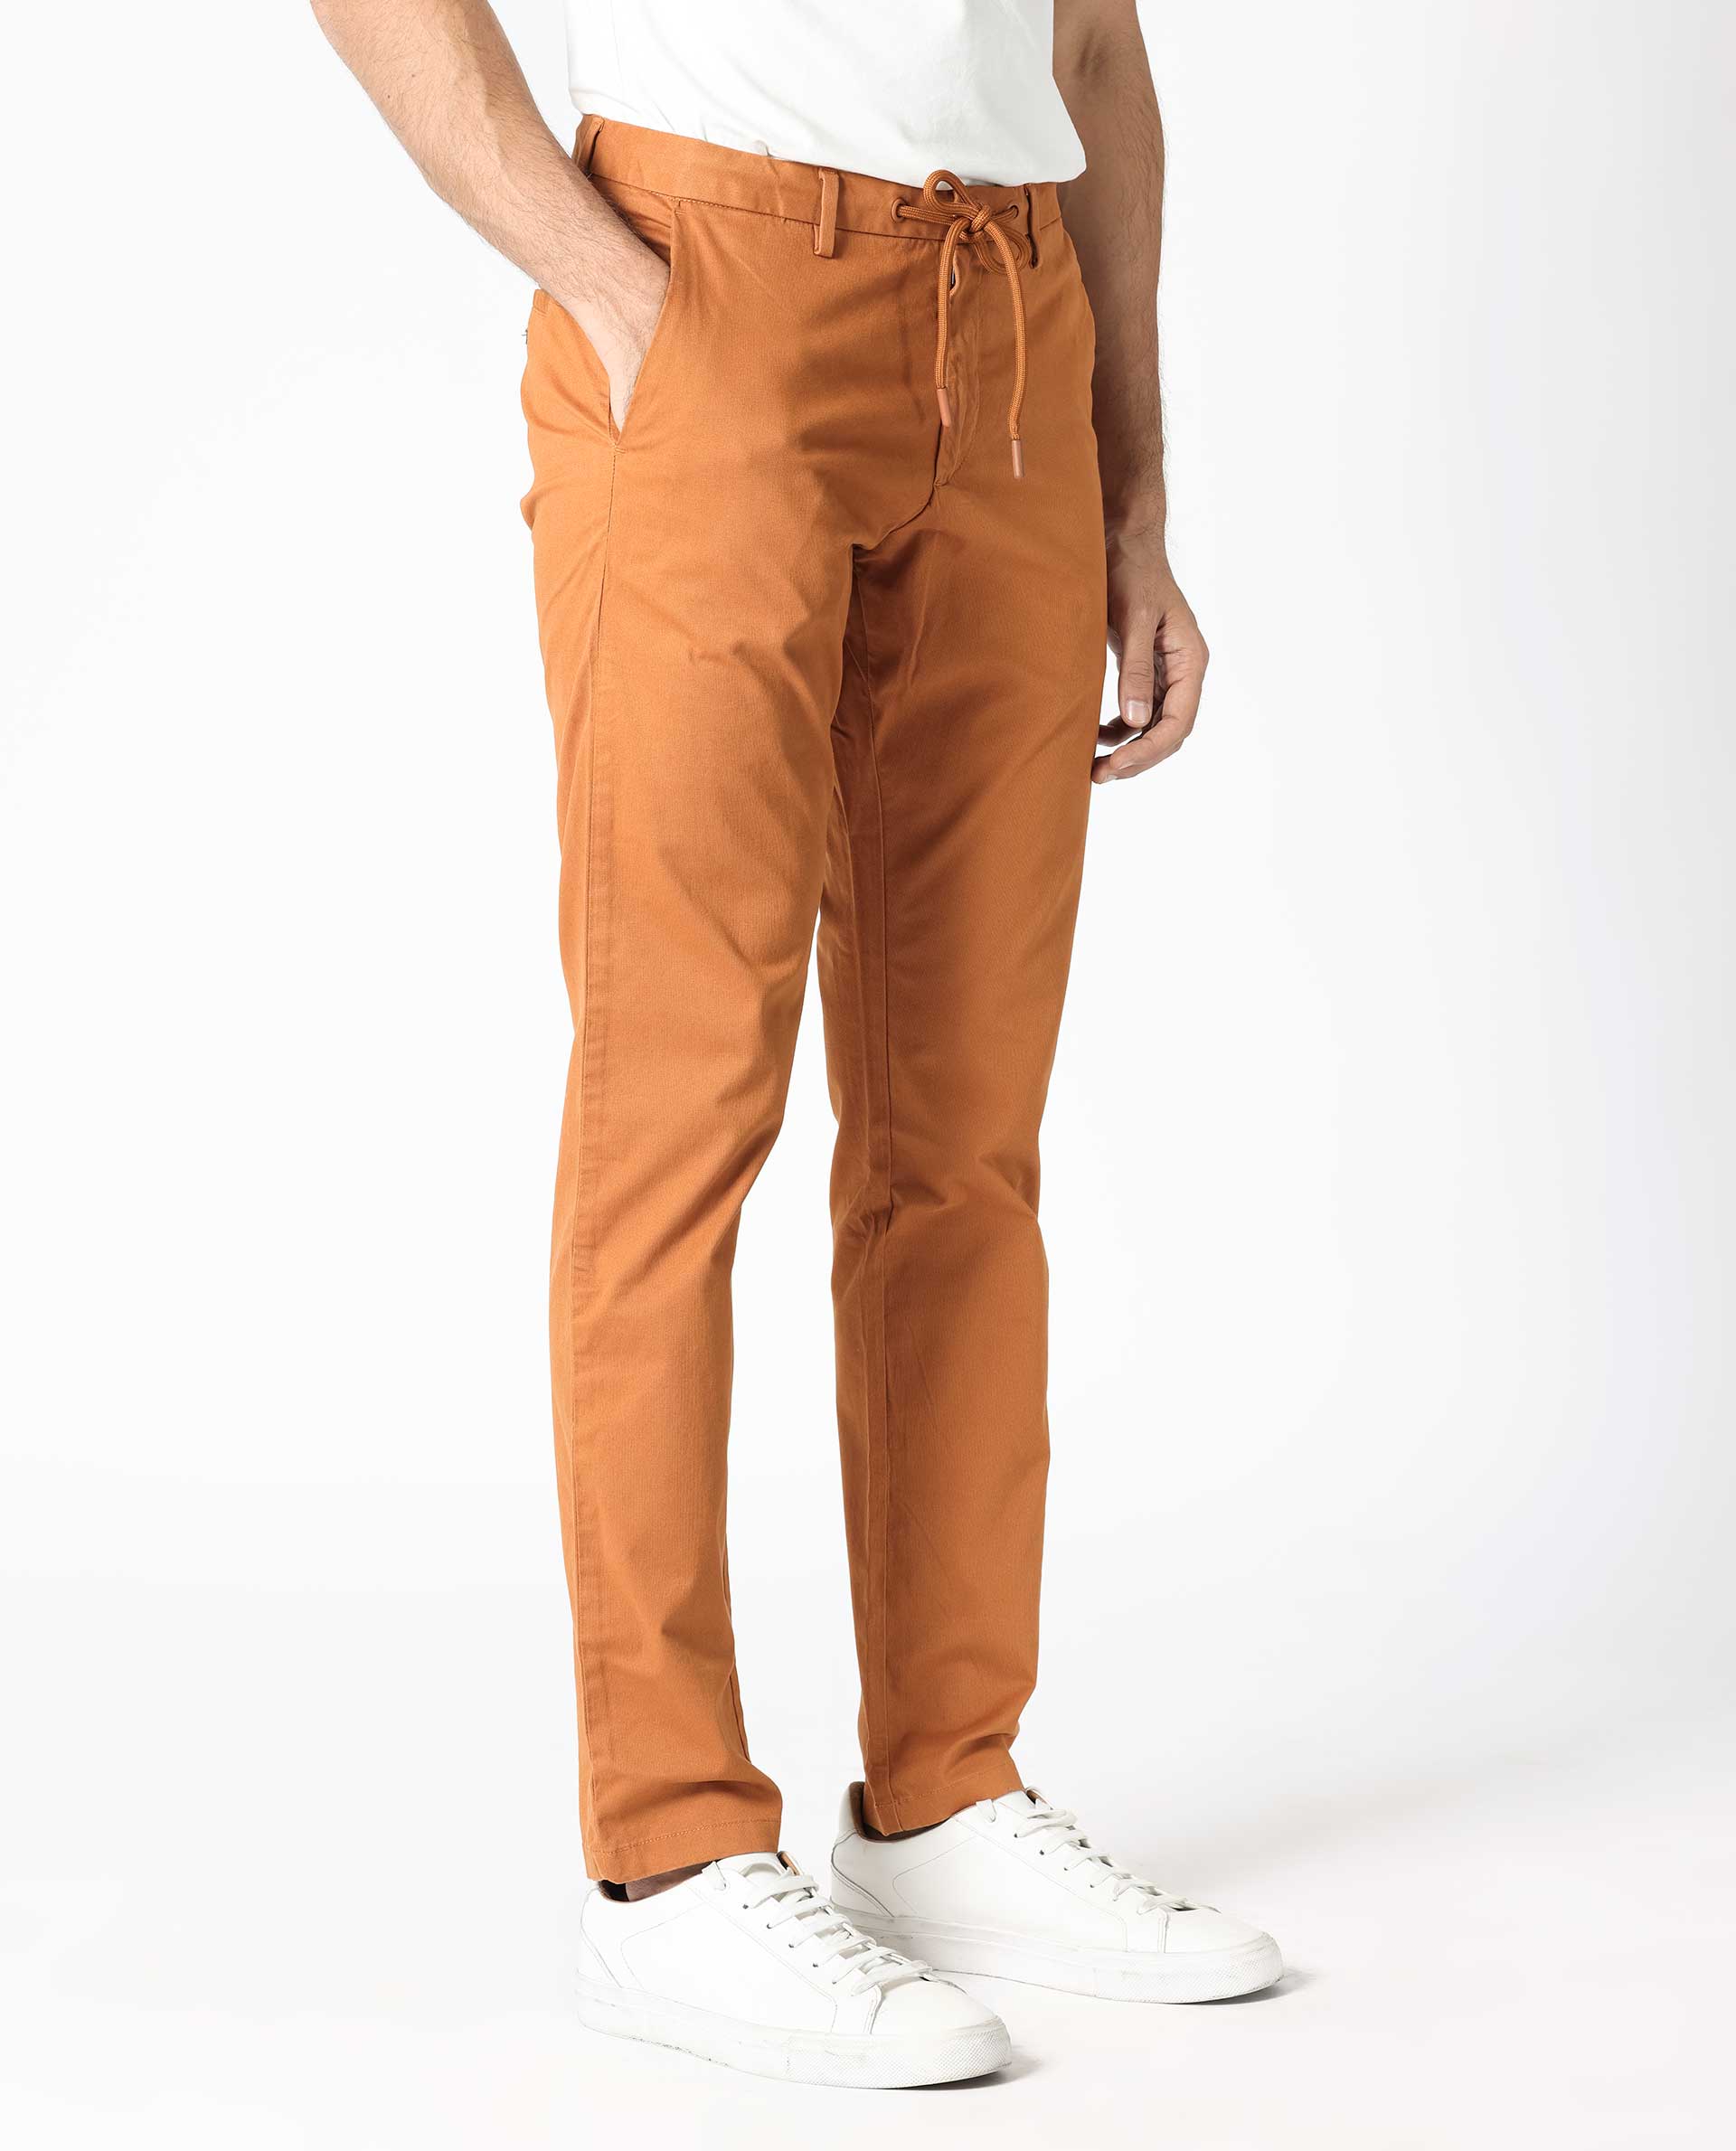 Cigarette Fitted Pants - Buy Indo Western Fitted Pants Online for